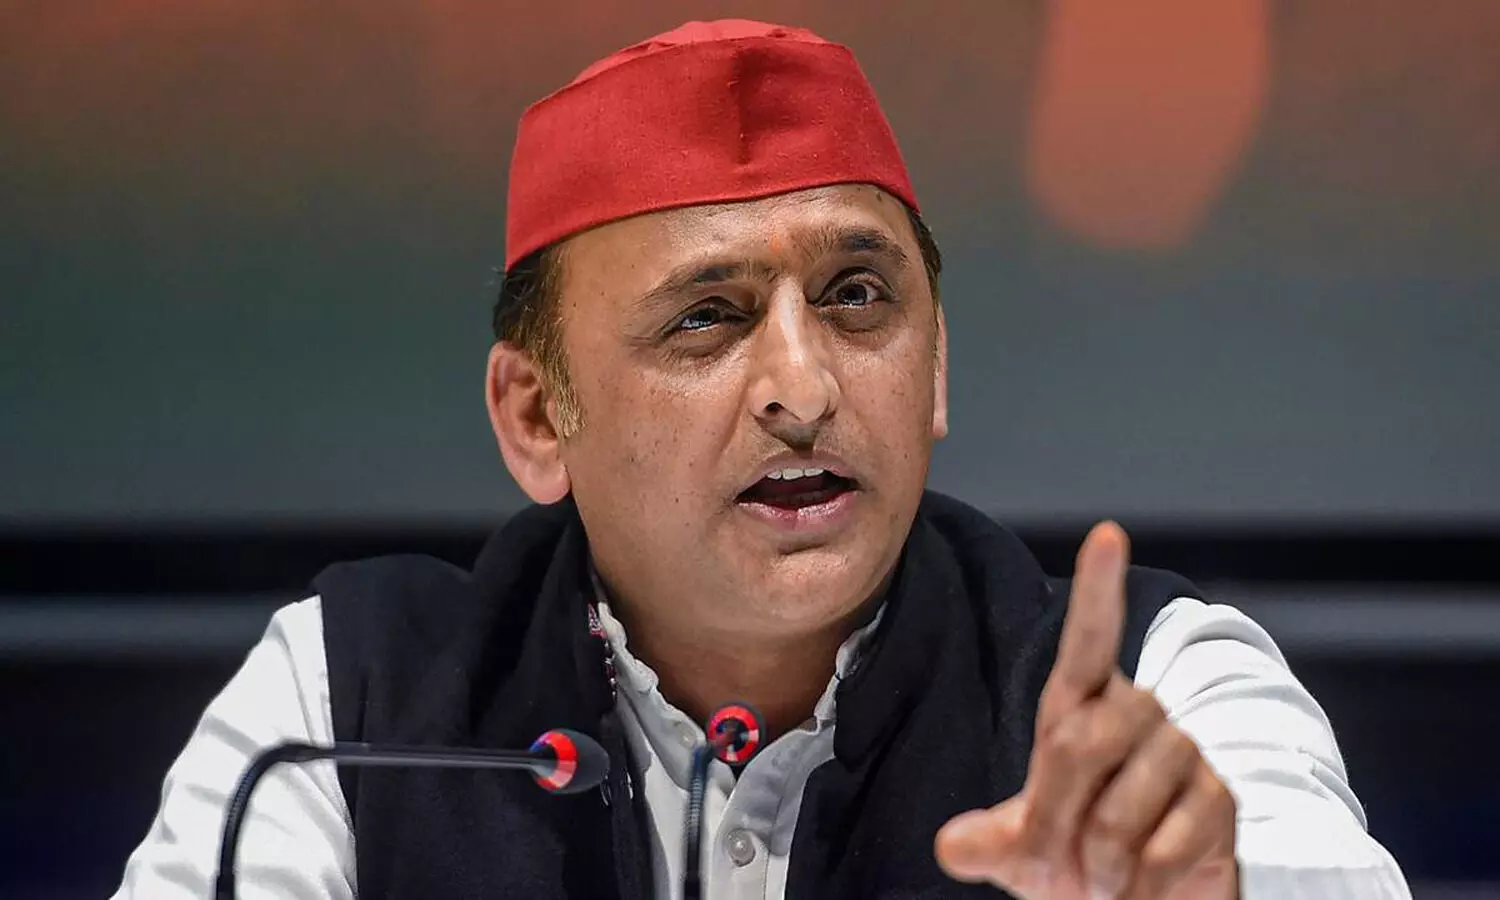 SP chief Akhilesh Yadav dissolves all party posts except one